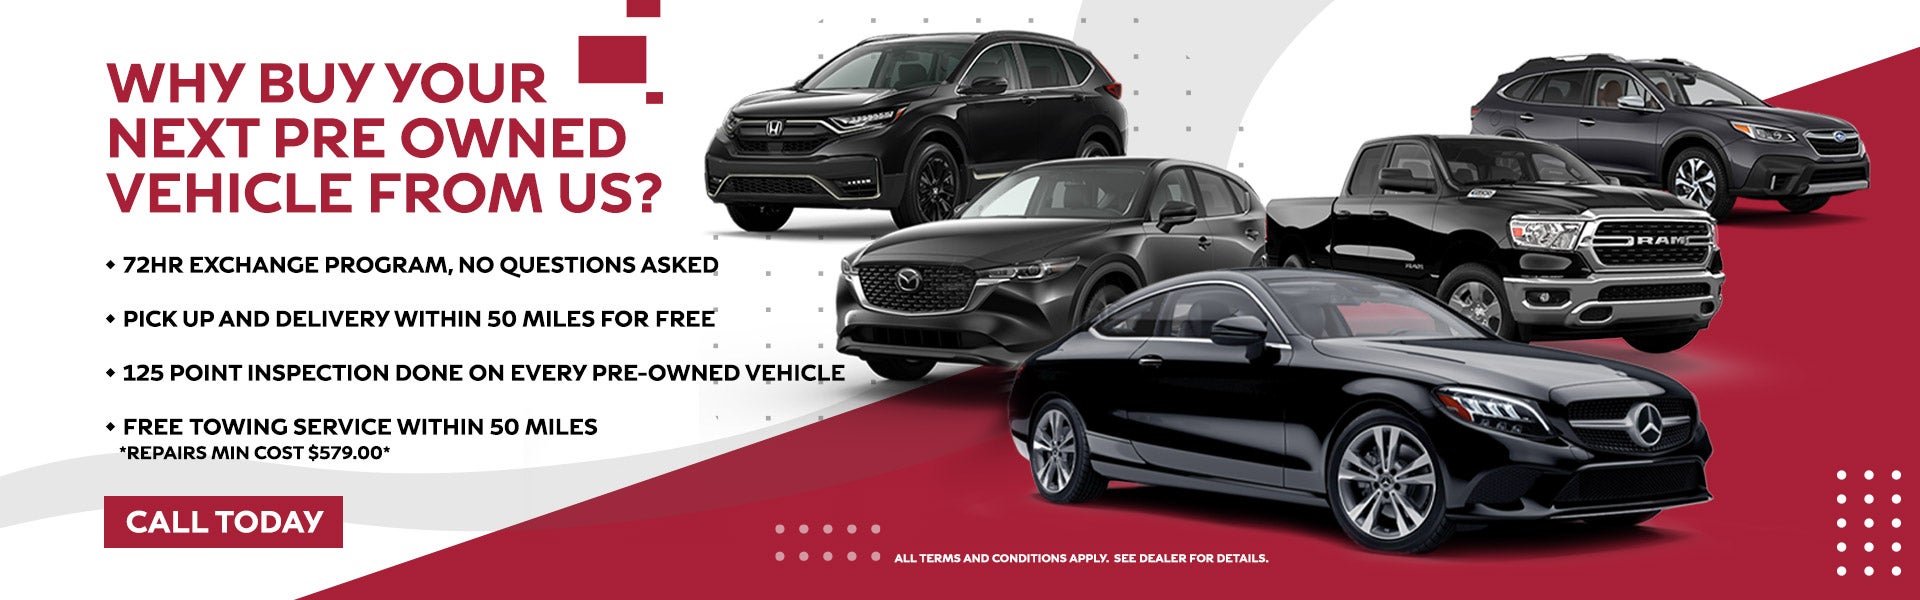 Why buy your next pre owned vehicle from us